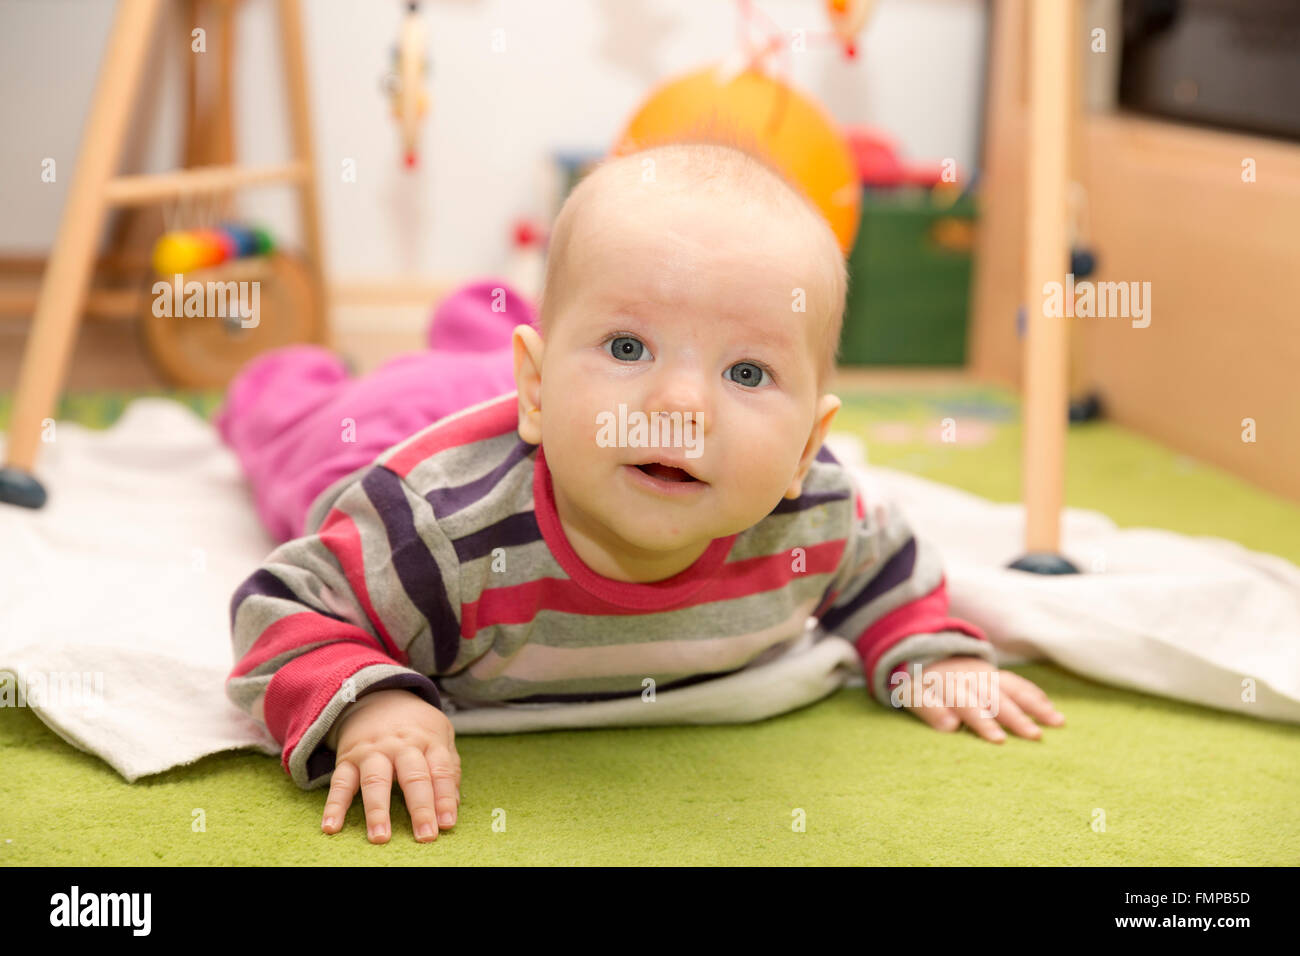 Baby, 4 months old, lying on its stomach raising its head Stock Photo